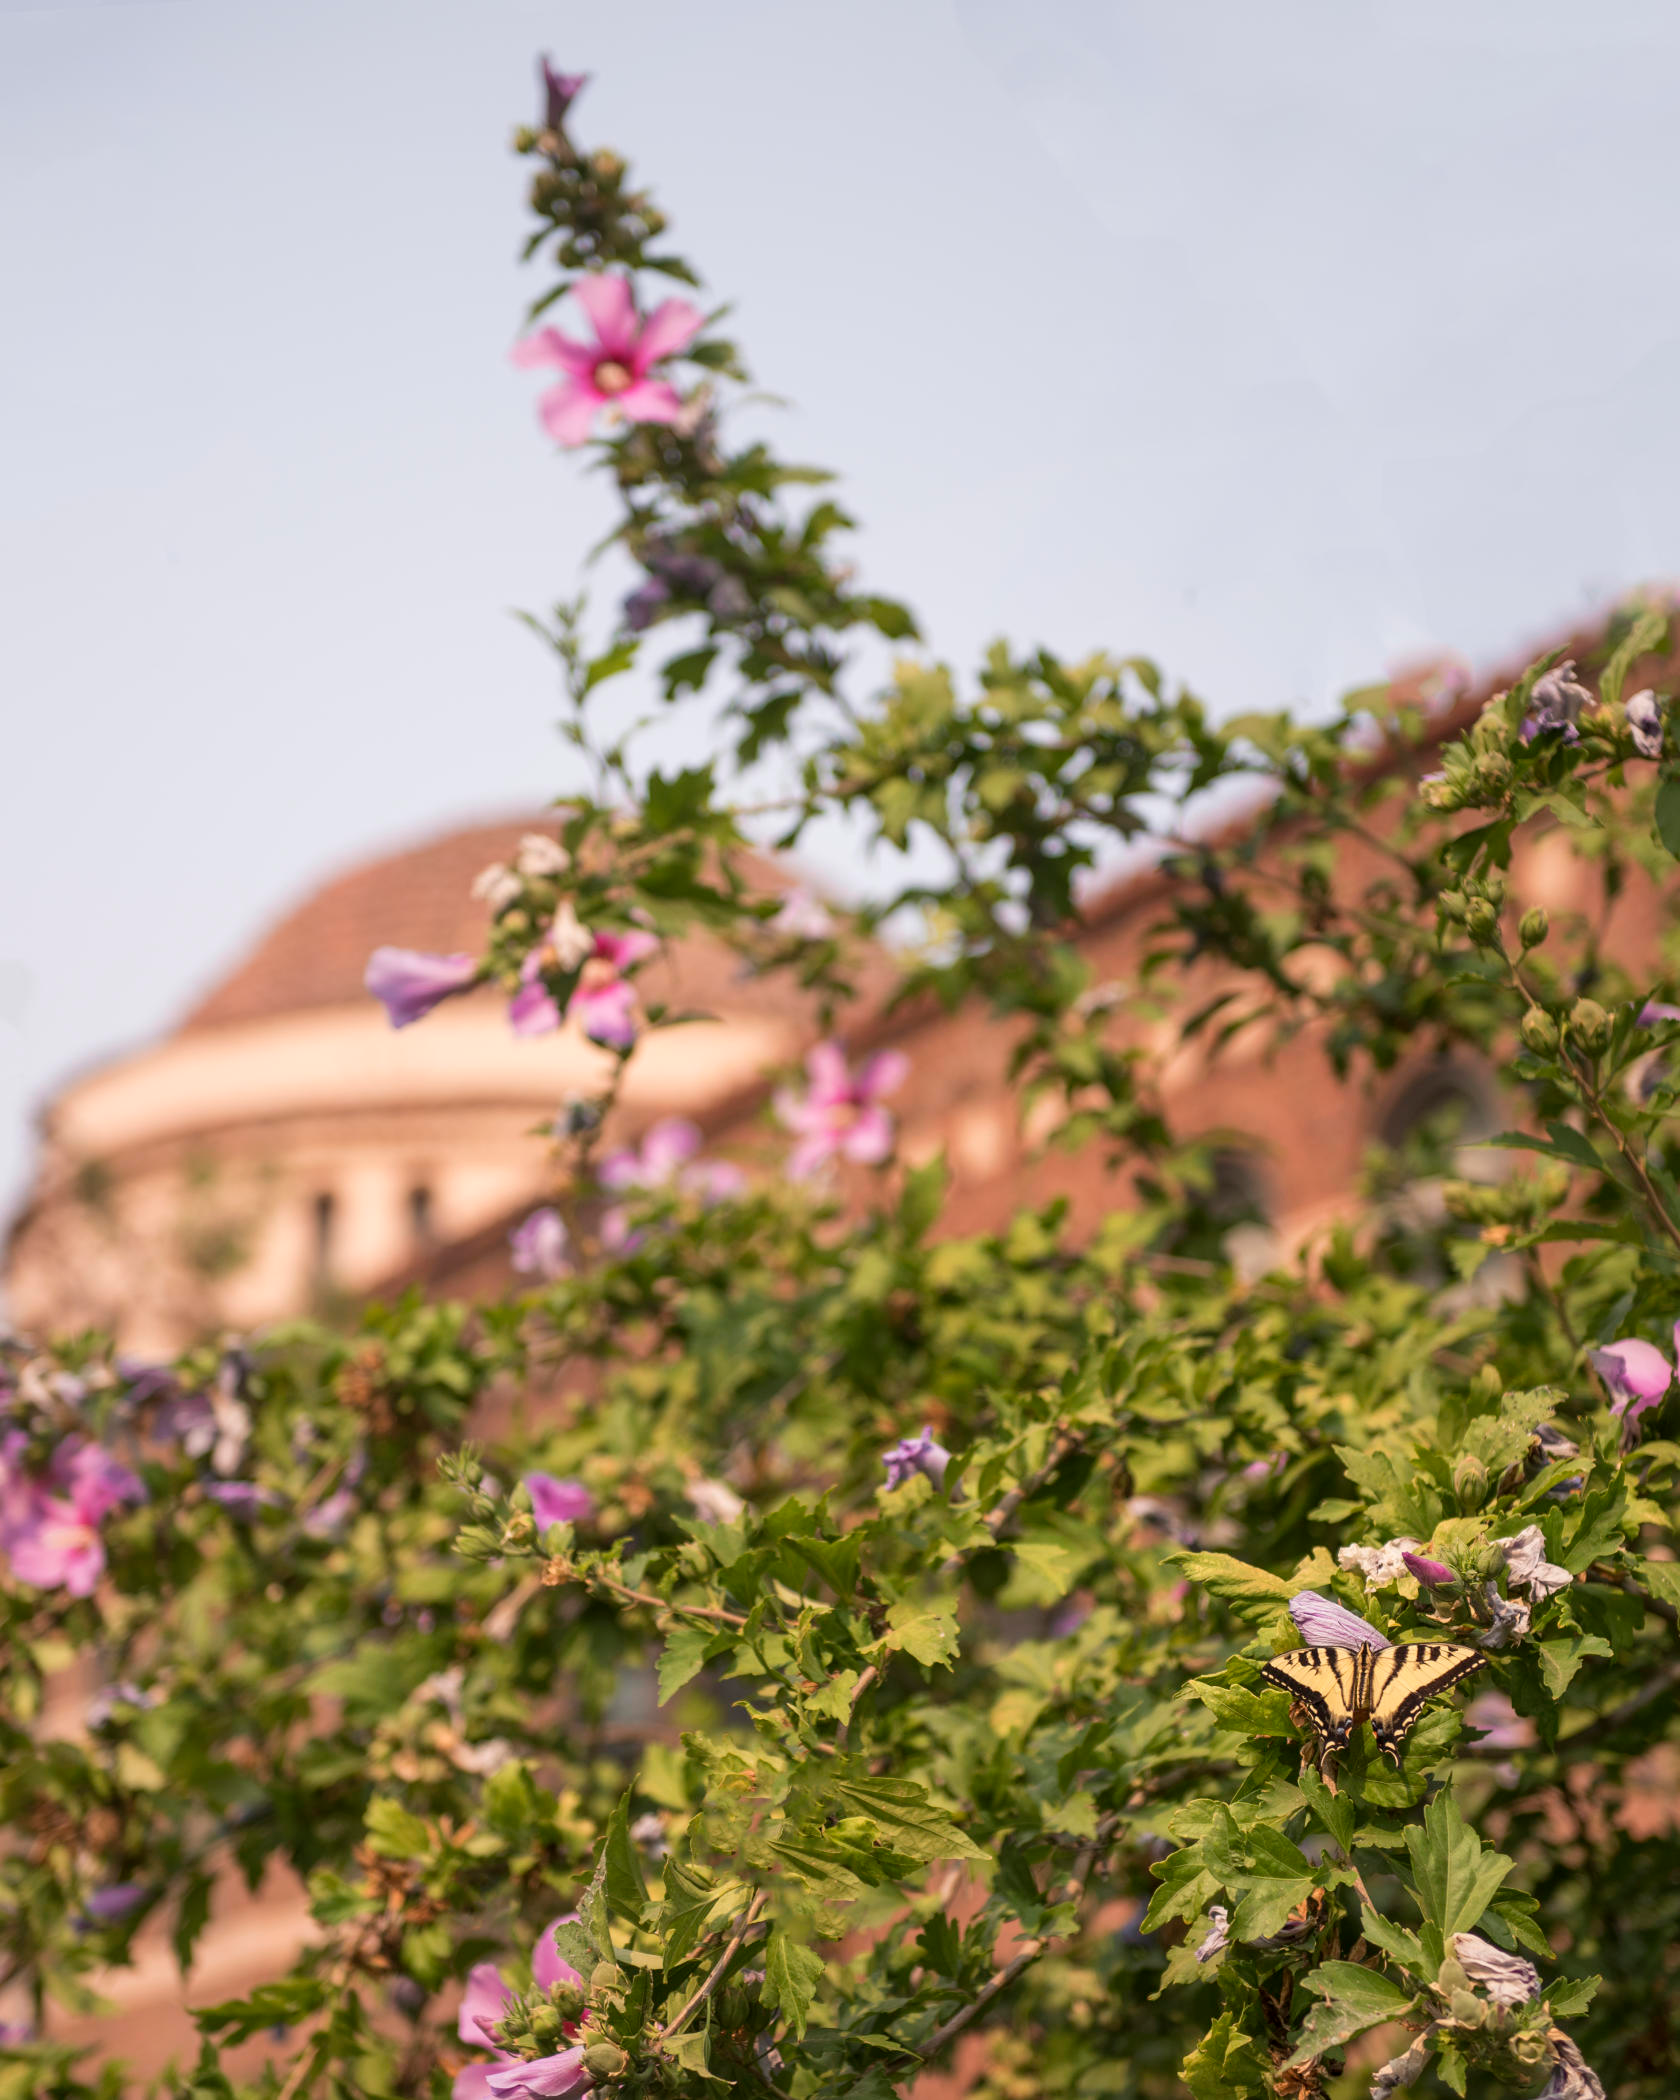 A butterfly lands among the hibiscus near Laxson Auditorium and Kendall Hall.